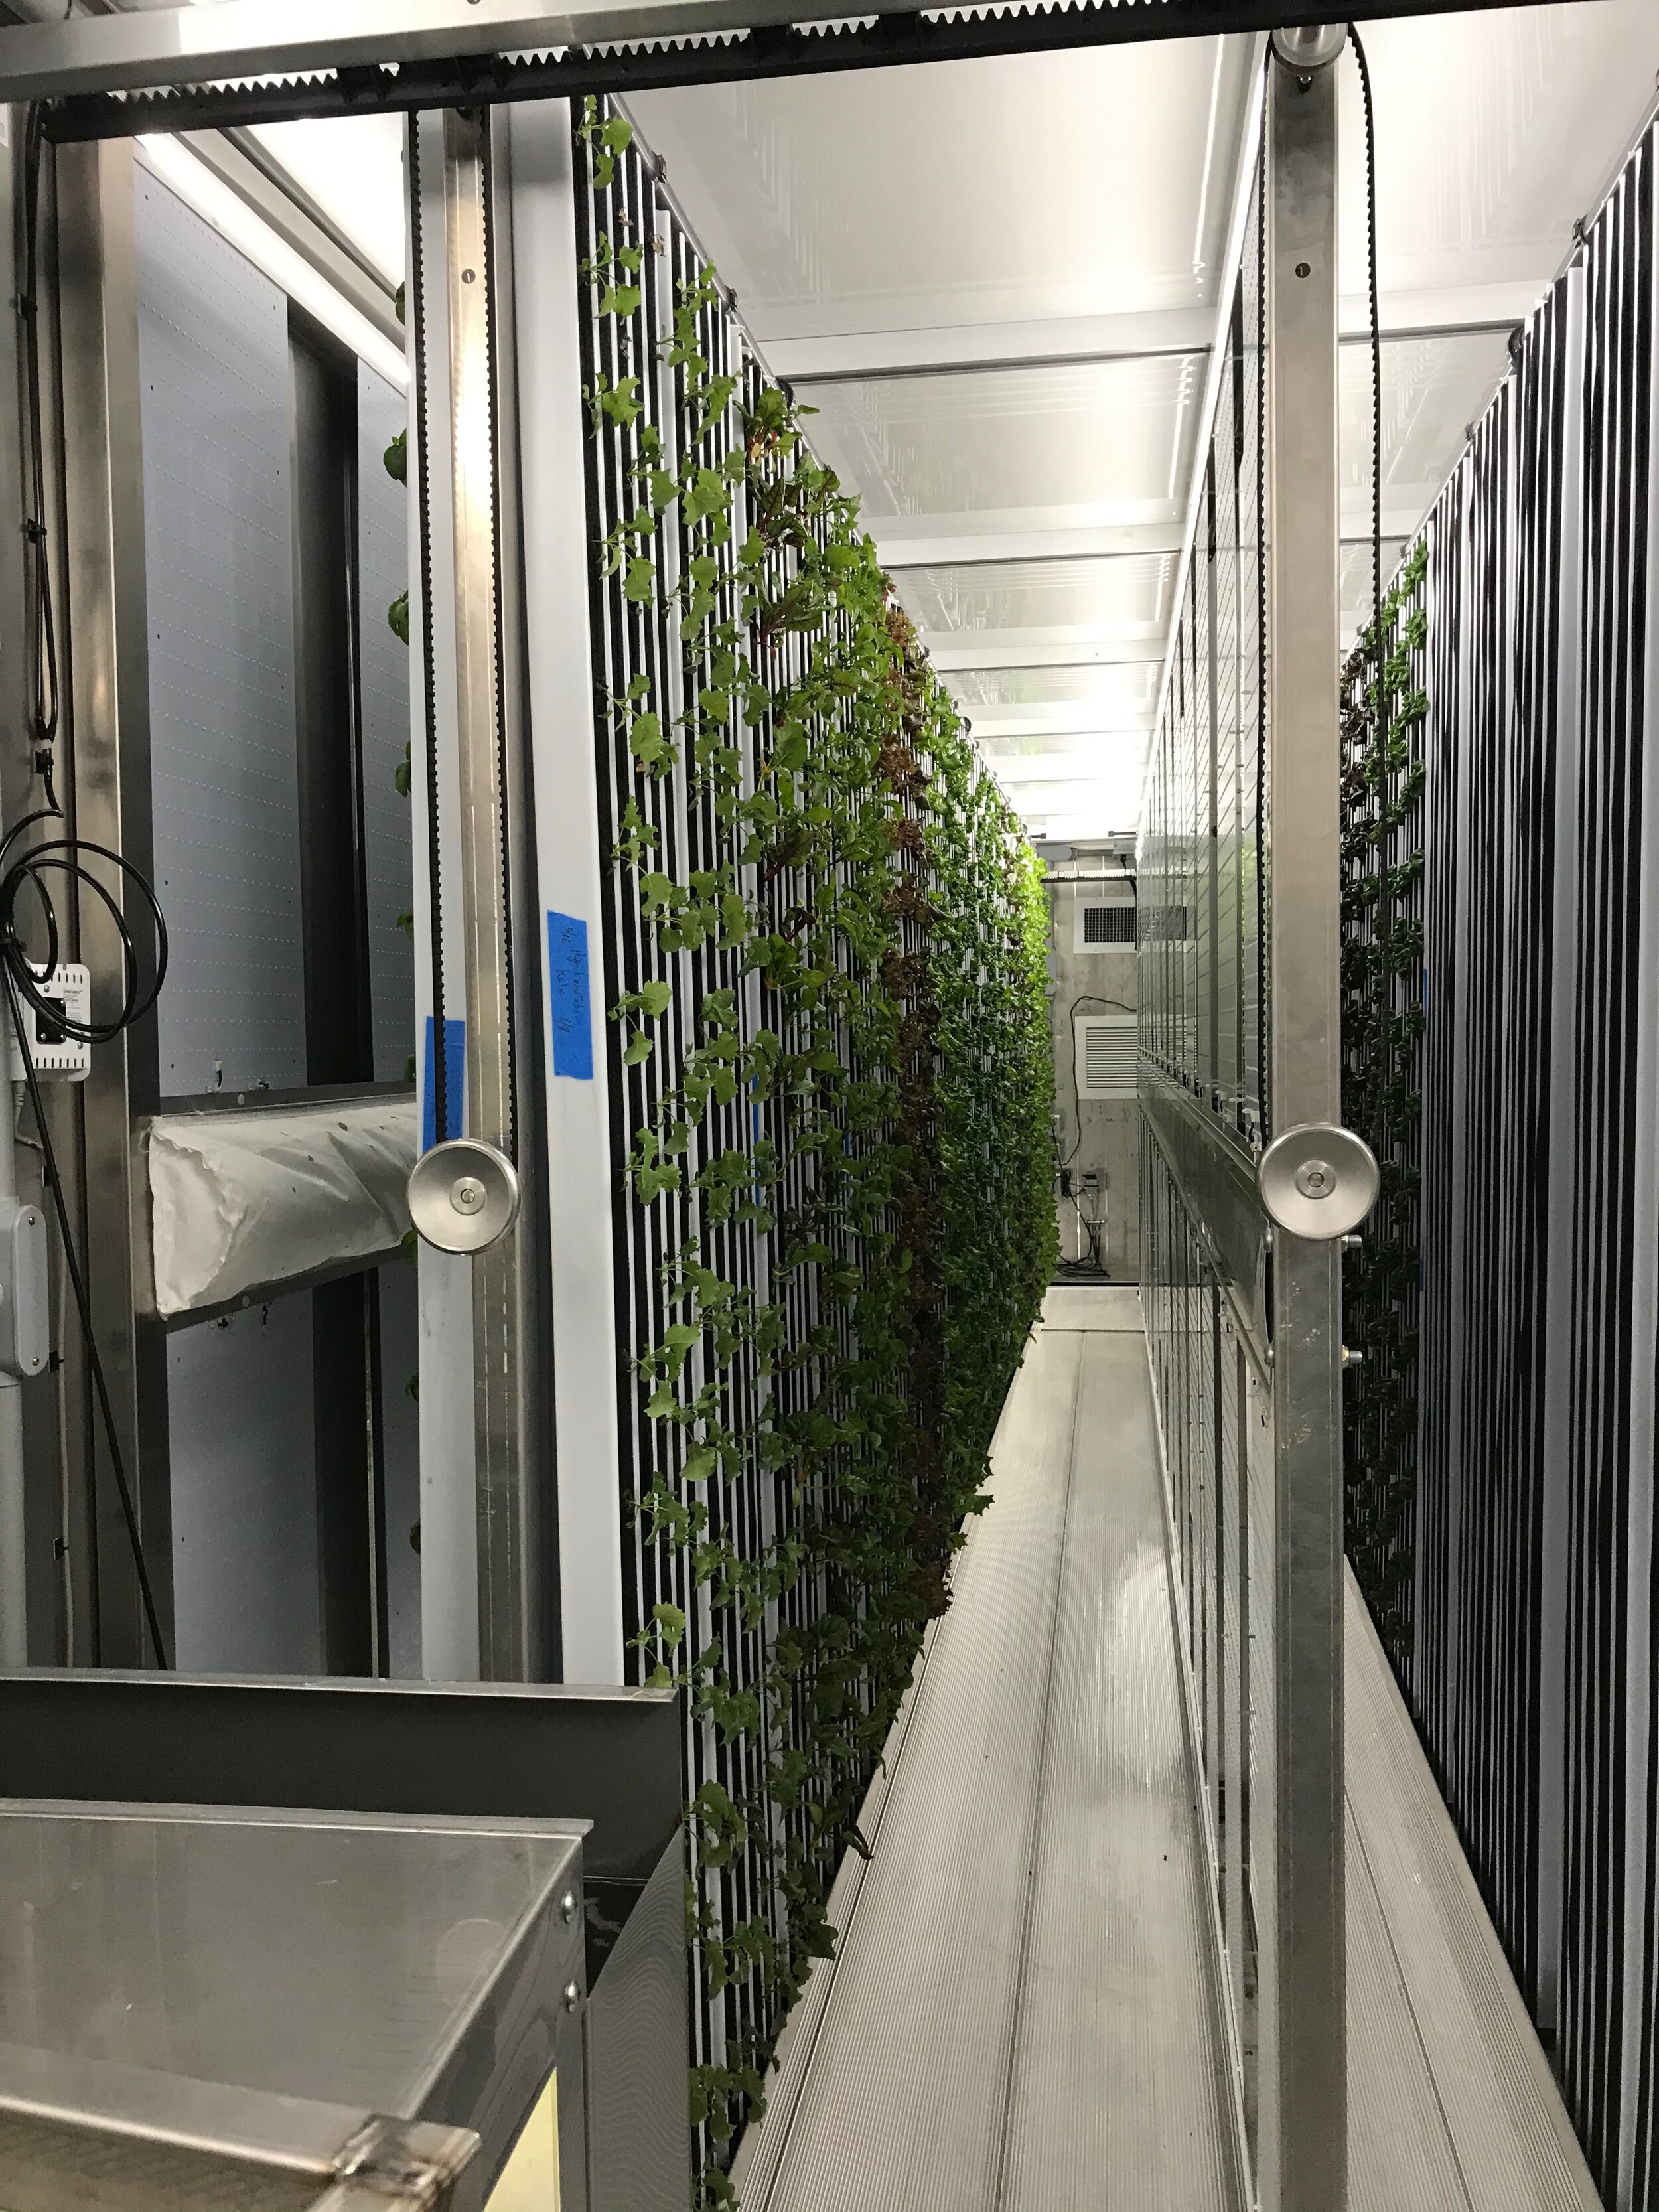 greenery-green-Hydroponic-Shipping-Container-Farm-Complete-Hydroponic Systems-Commercial-Vertical-Hydroponic-Systems-Pre-Owned-Freight-Farm-Greenery.jpg